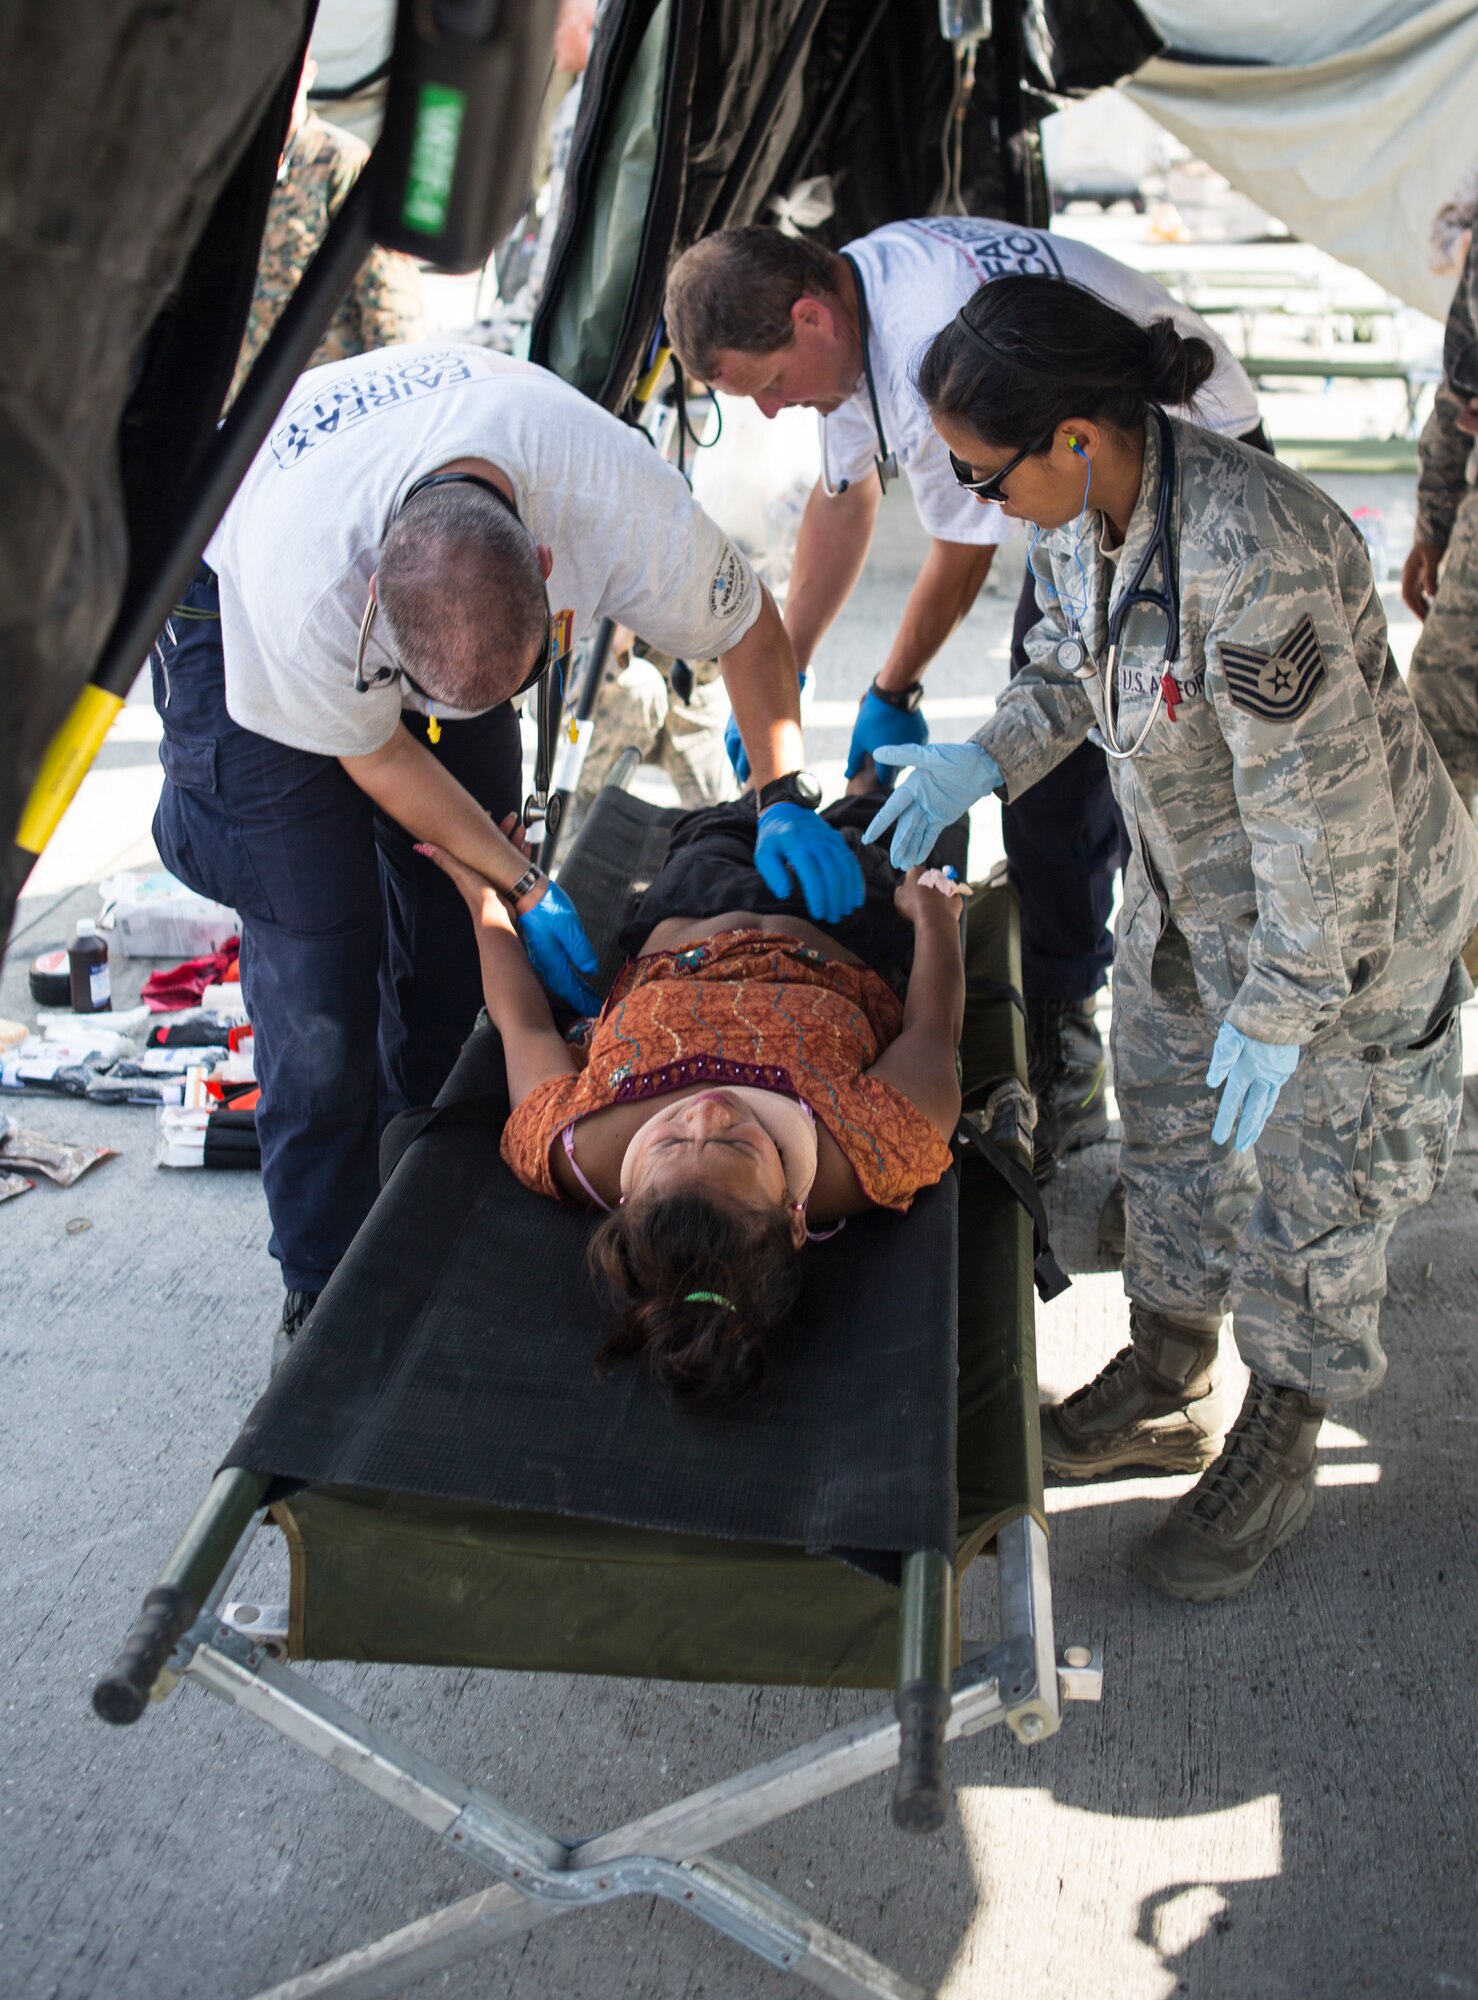 A U.S. Service member with Joint Task Force-505 and rescue and medical personnel provide aid to an earthquake victim at a medical triage area at Tribhuvan International Airport, Kathmandu, Nepal, after a 7.3 magnitude earthquake struck the country, May 12, 2015. JTF-505 along with other multinational forces and humanitarian relief organizations are currently in Nepal providing aid after a 7.8 magnitude earthquake struck the country, April 25, 2015. At Nepal's request the U.S. government ordered JTF-505 to provide unique capabilities to assist Nepal. (U.S. Marine Corps photo by MCIPAC Combat Camera Staff Sgt. Jeffrey D. Anderson/Released)